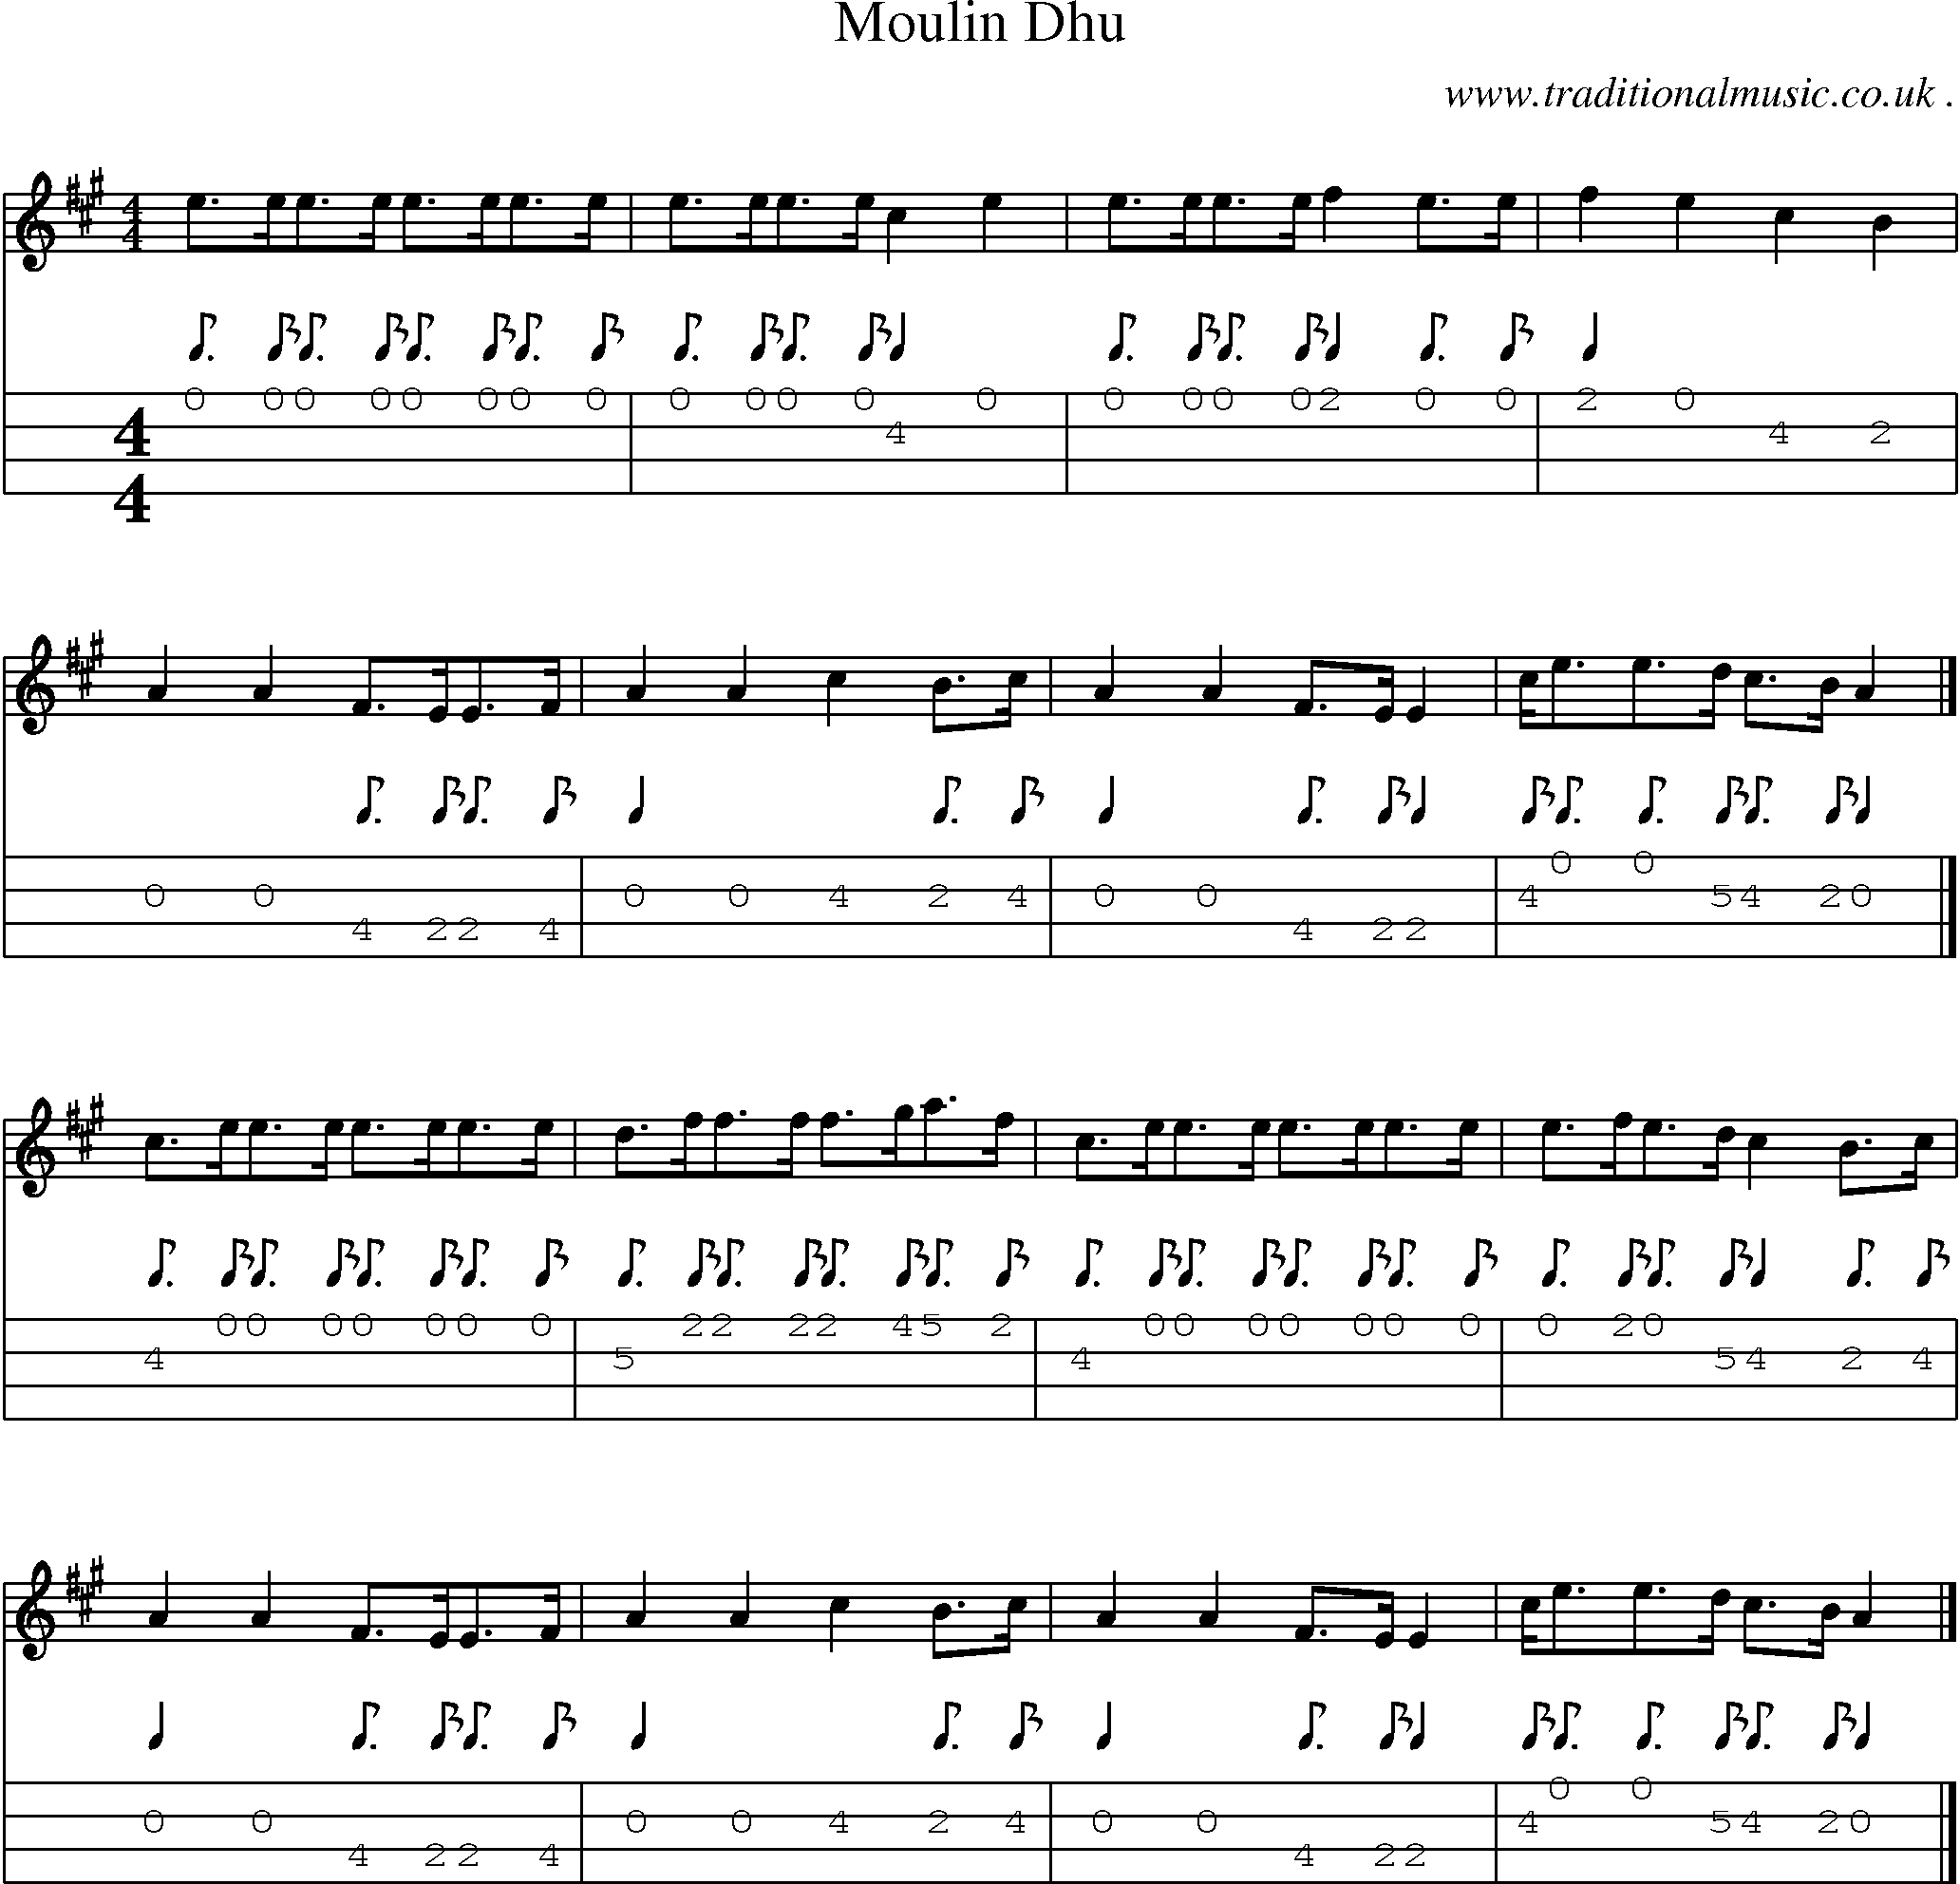 Sheet-music  score, Chords and Mandolin Tabs for Moulin Dhu